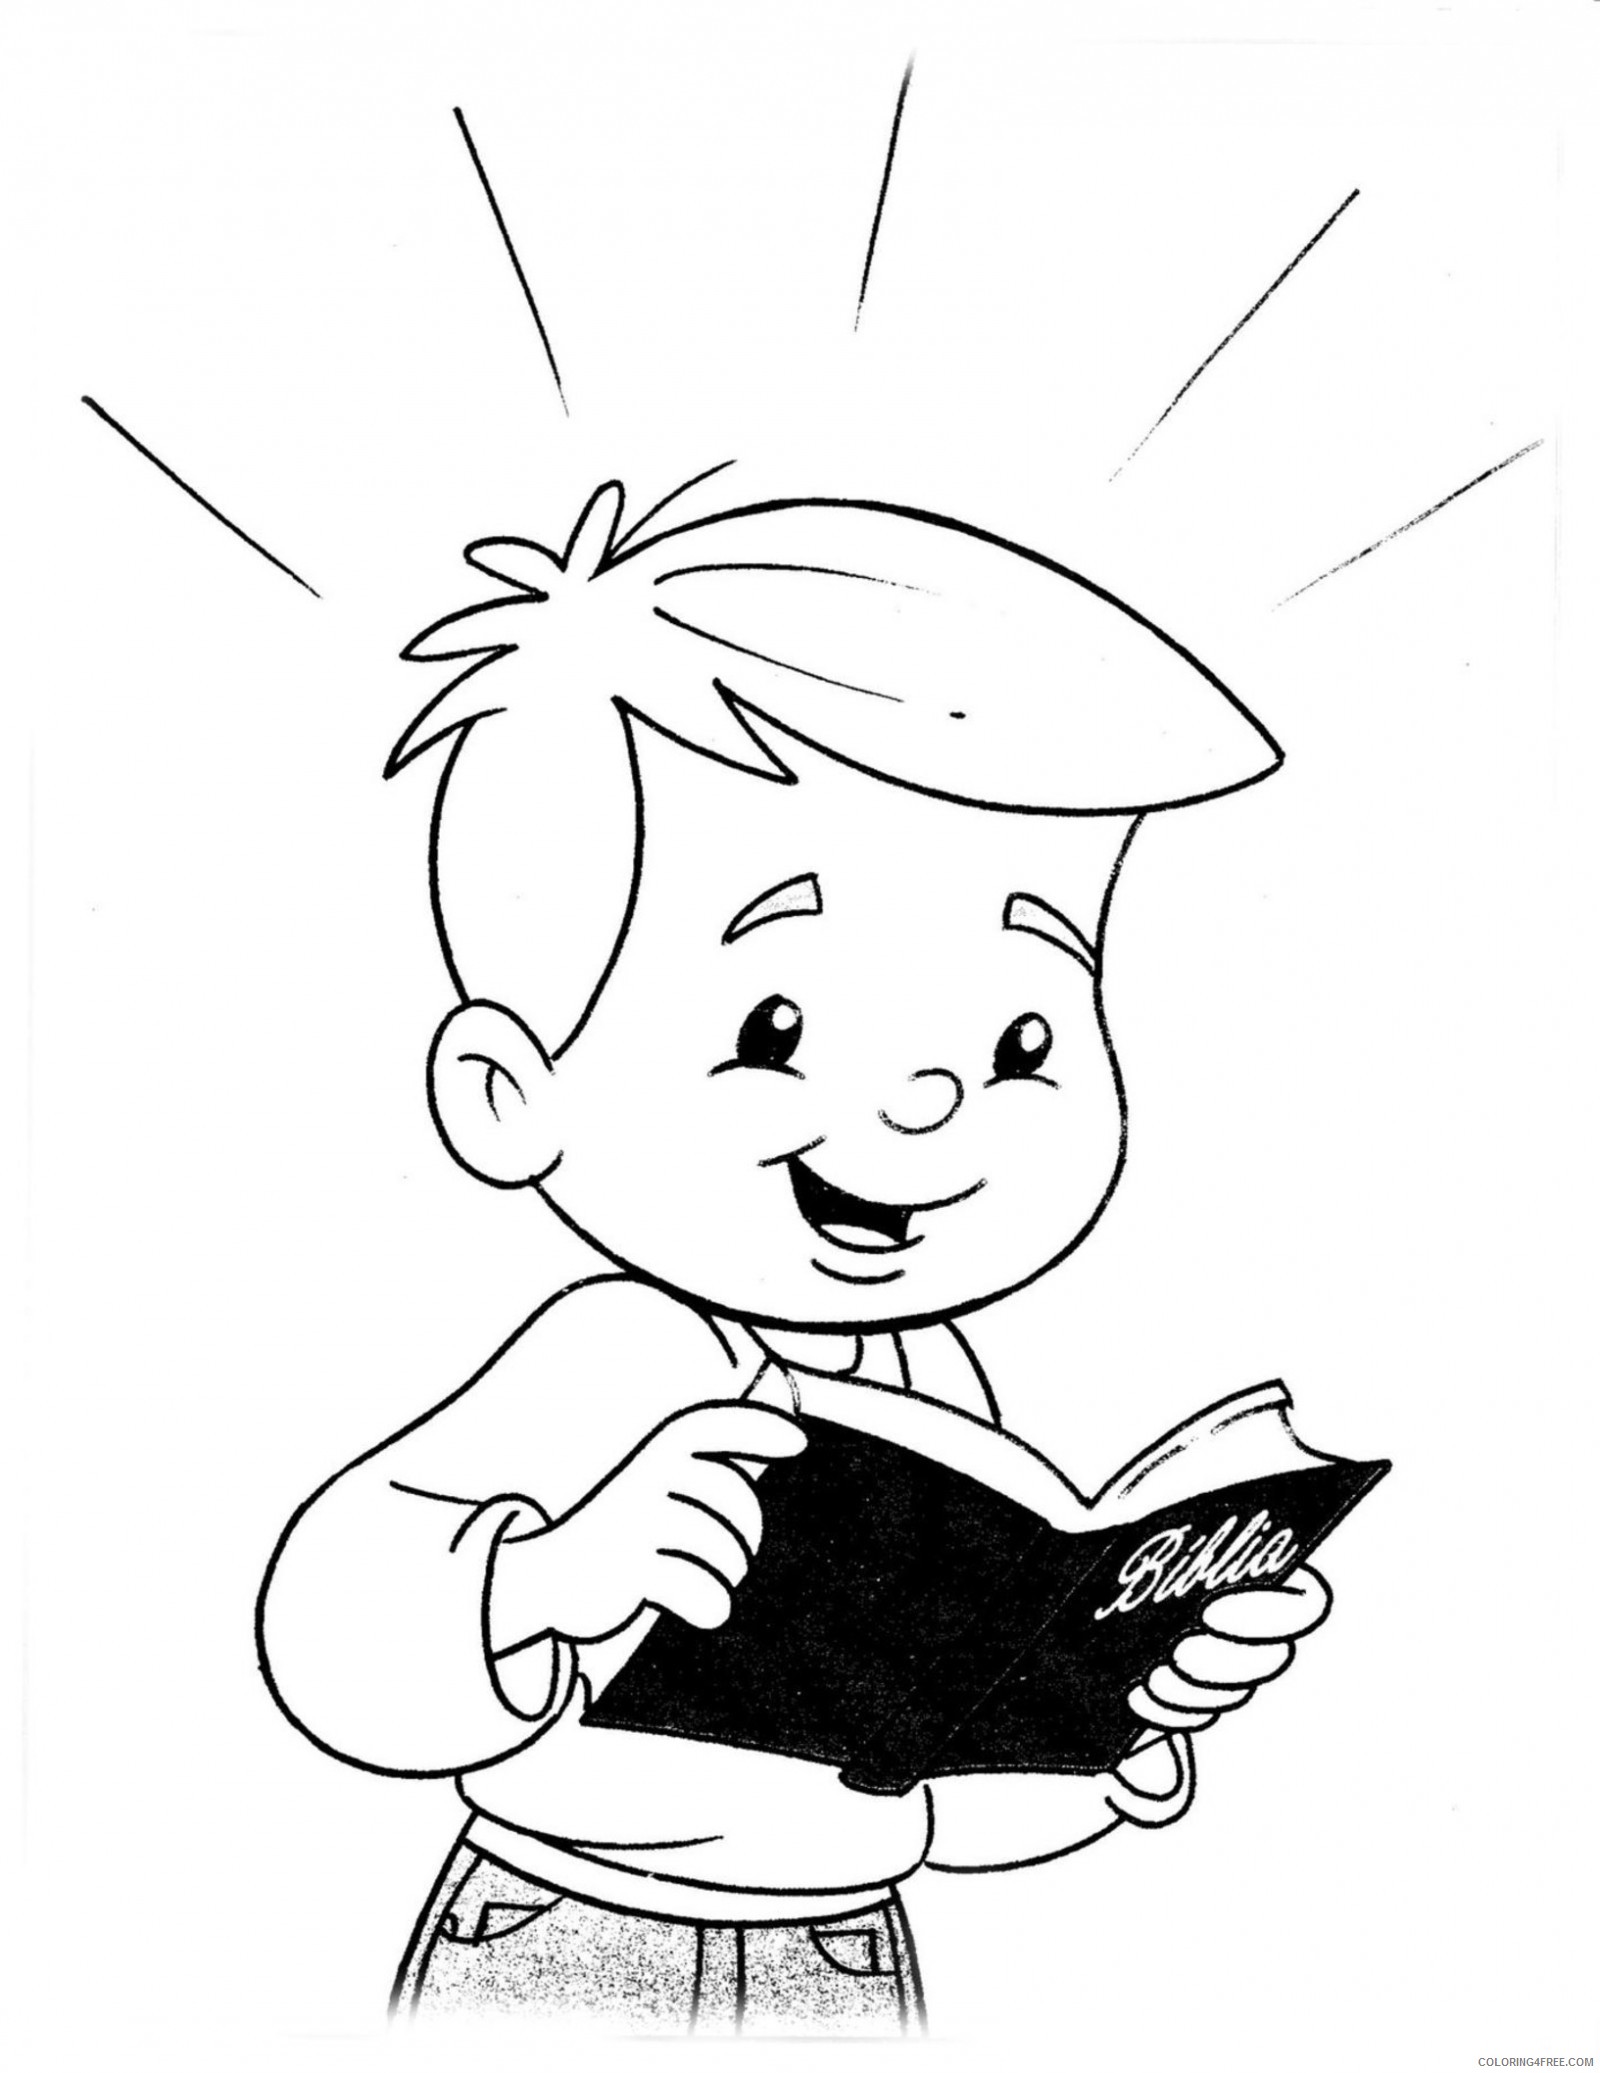 kid reading bible coloring pages Coloring4free